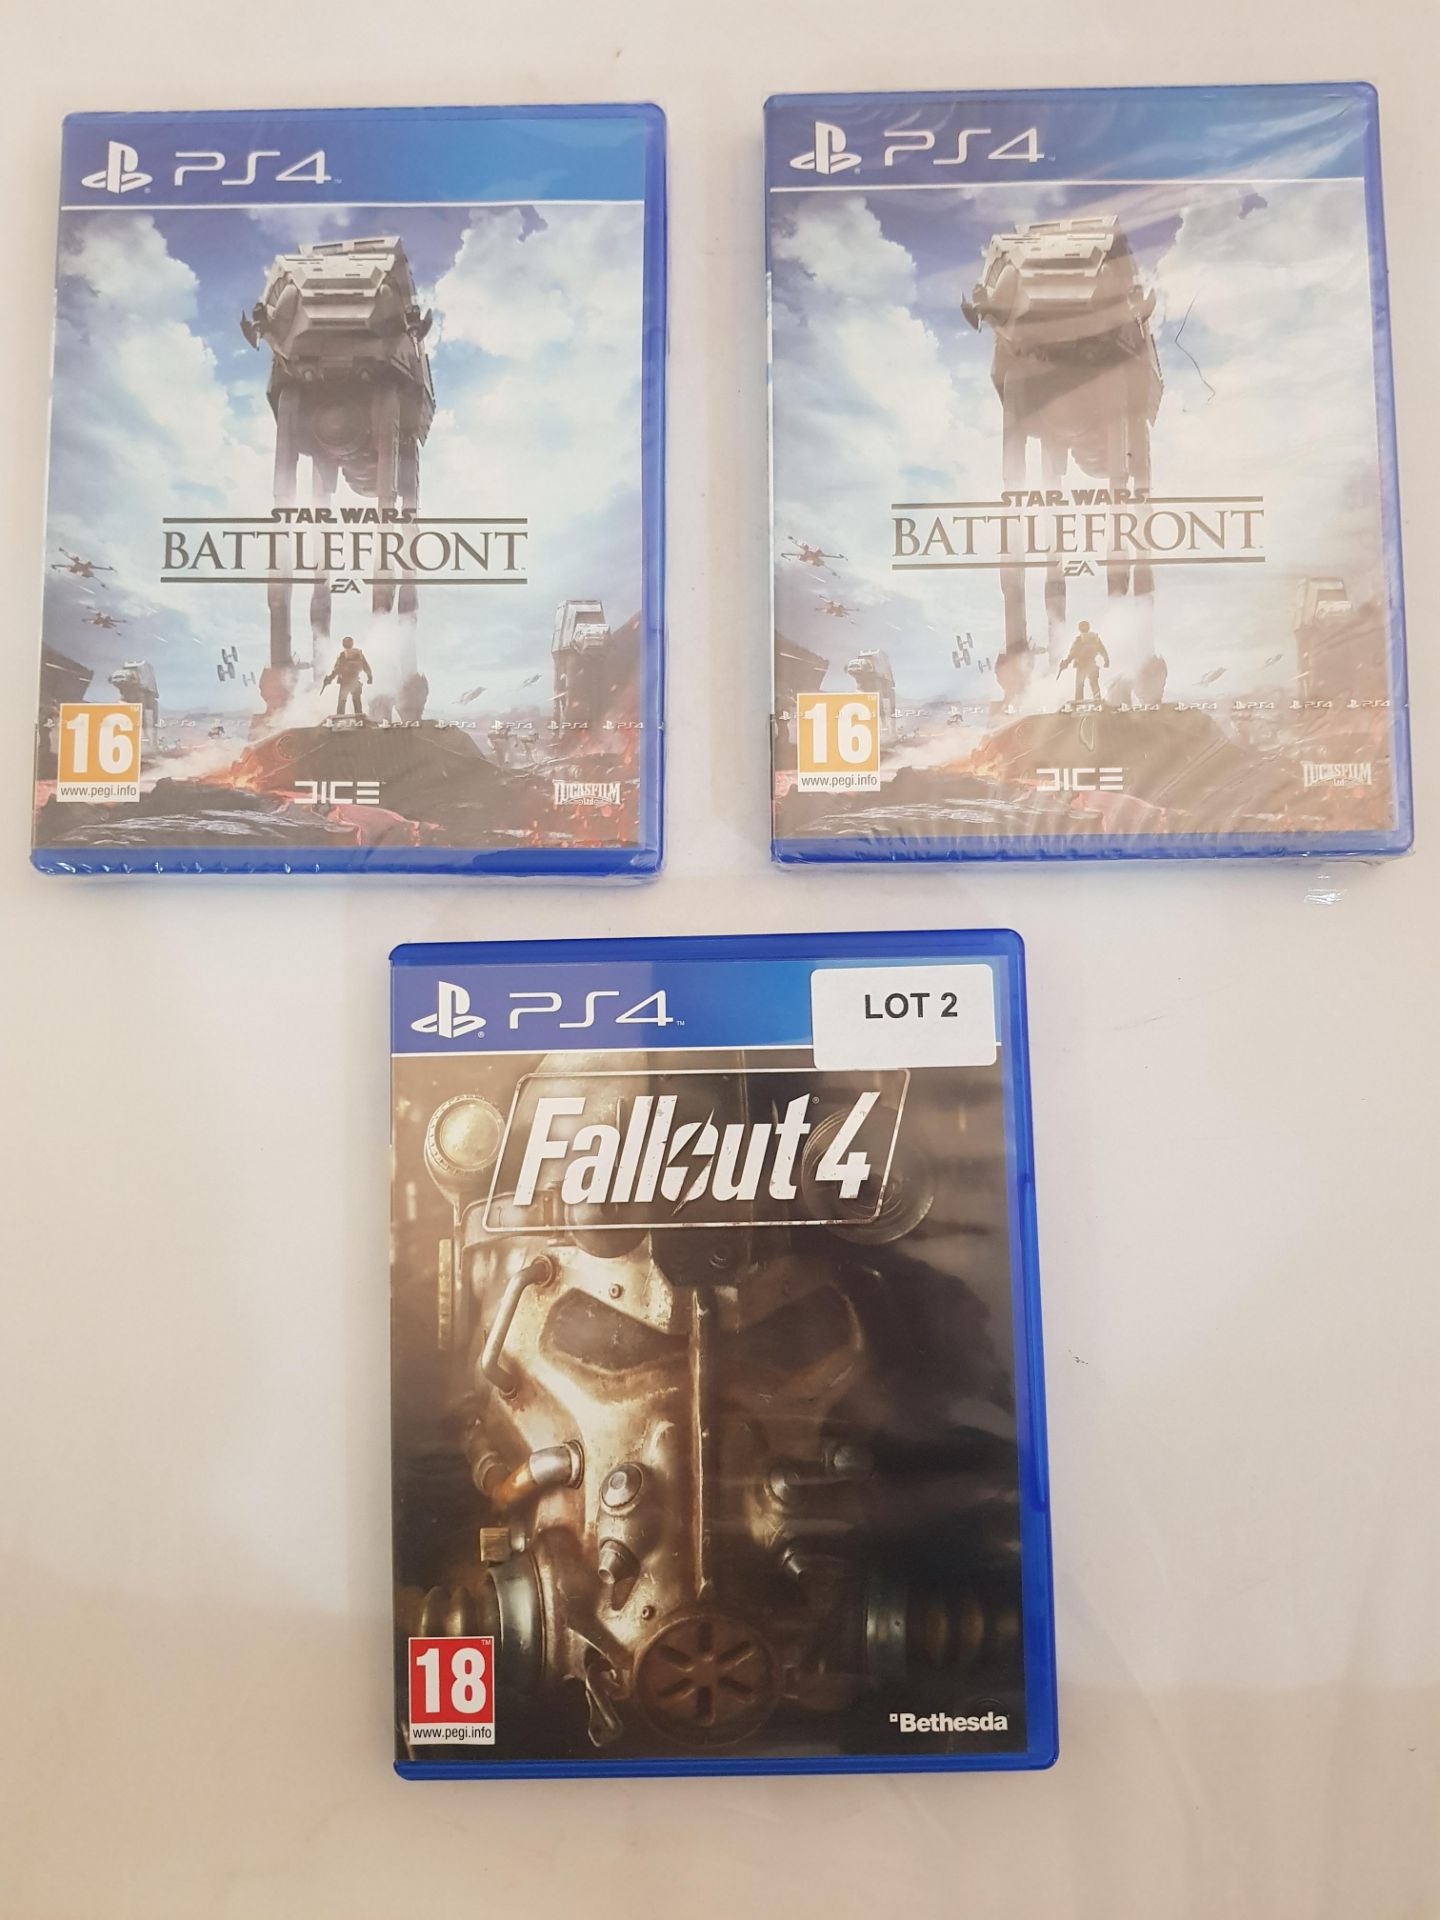 3 x PS4 games to included 2 x Star Wars Battlefront and Fallout 4